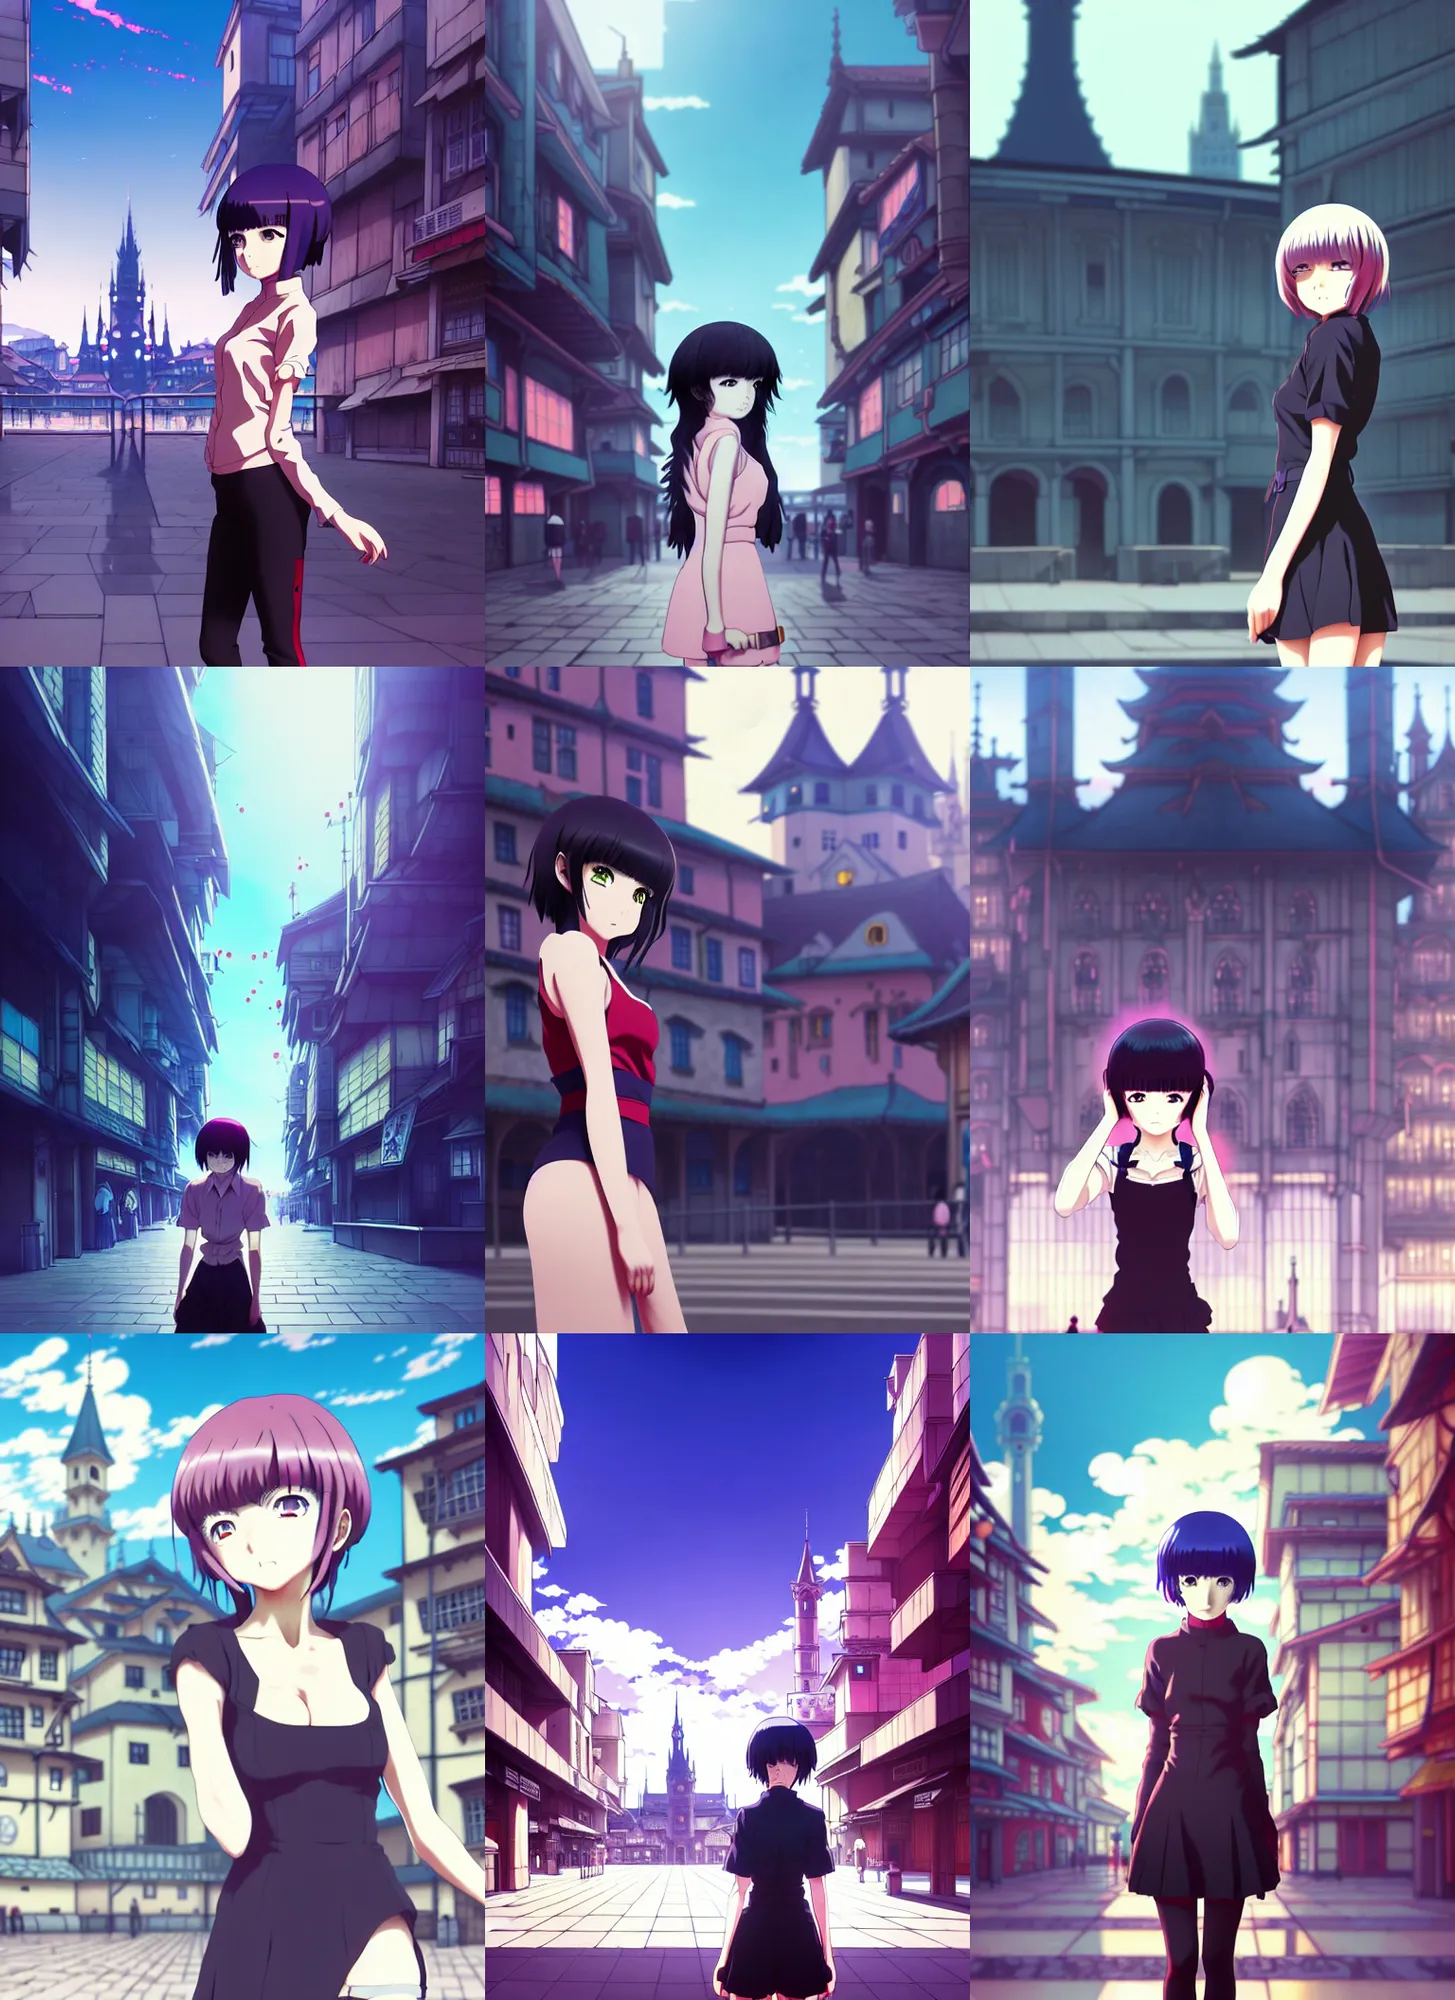 Prompt: anime frames, anime visual, full body portrait of a young woman in the medieval city square looking at the fantasy palace in the distance, cute face by ilya kuvshinov, ghost in the shell, dynamic pose, dynamic perspective, rounded eyes, moody, psycho pass, kyoani, yoh yoshinari